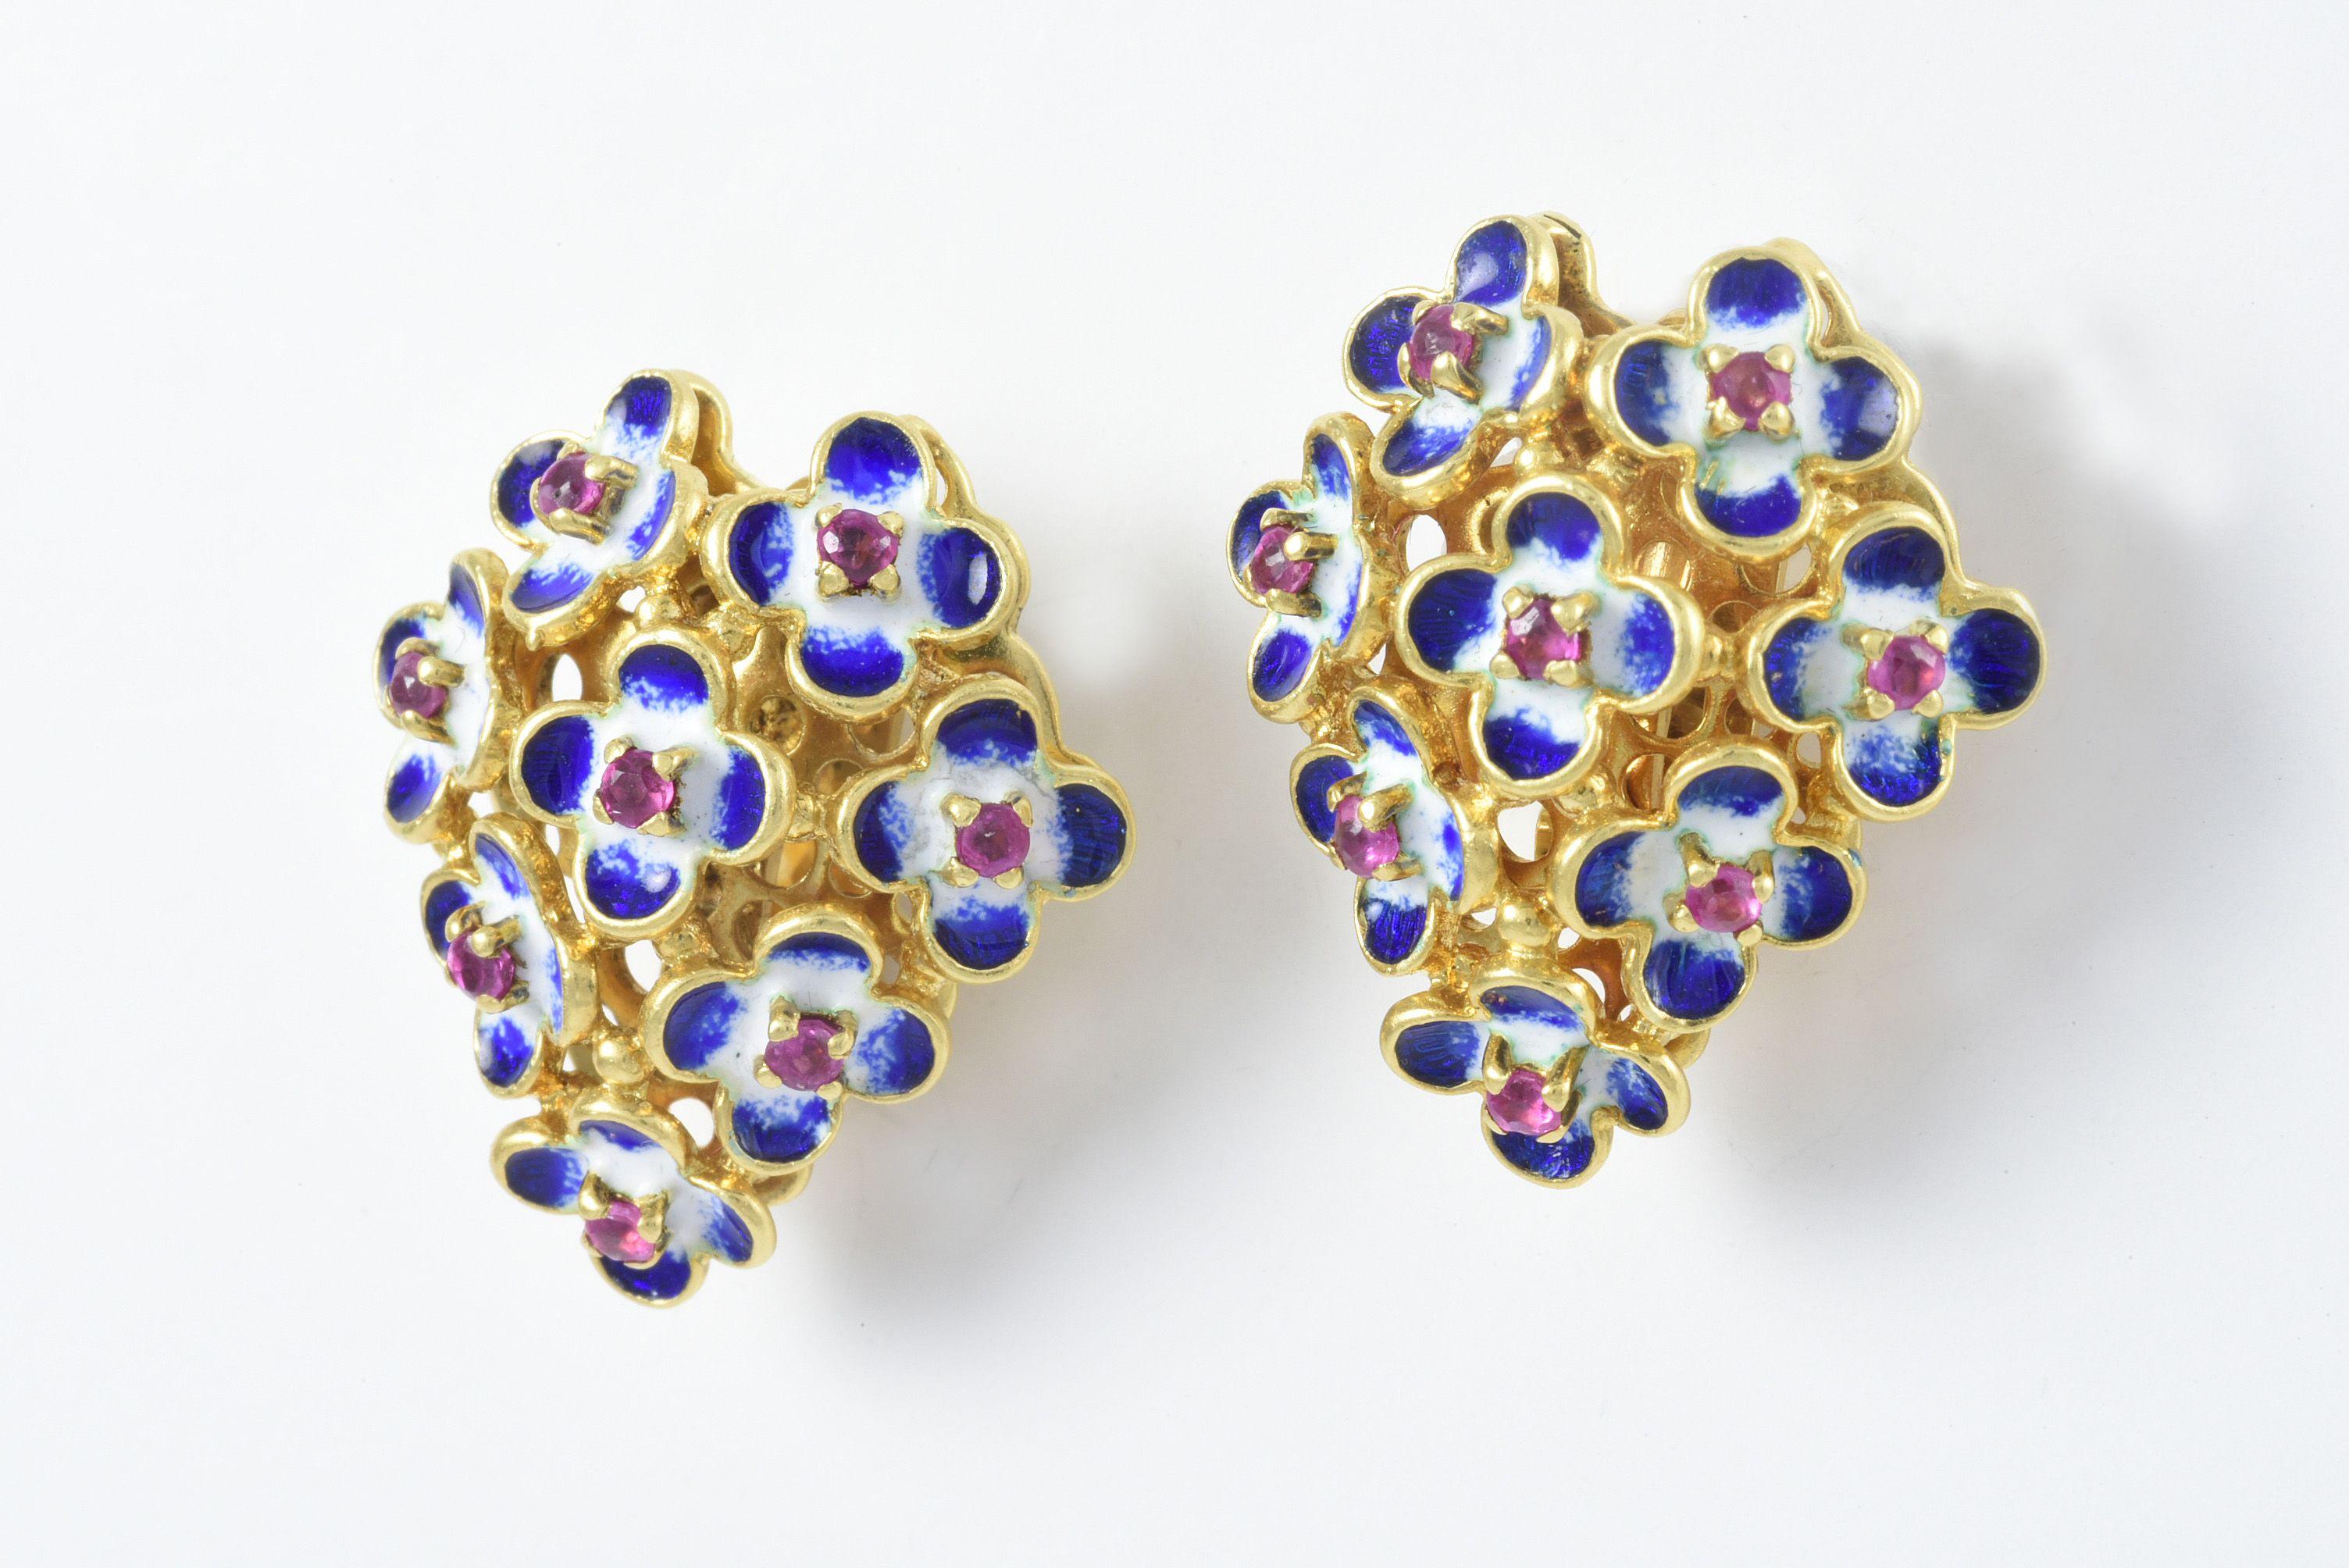 Fashioned in 18kt yellow gold, these vintage Italian-made earrings feature sixteen round pink tourmalines that center delicate white and blue enamel petals to create a beautiful floral motif and secured with omega backs. 